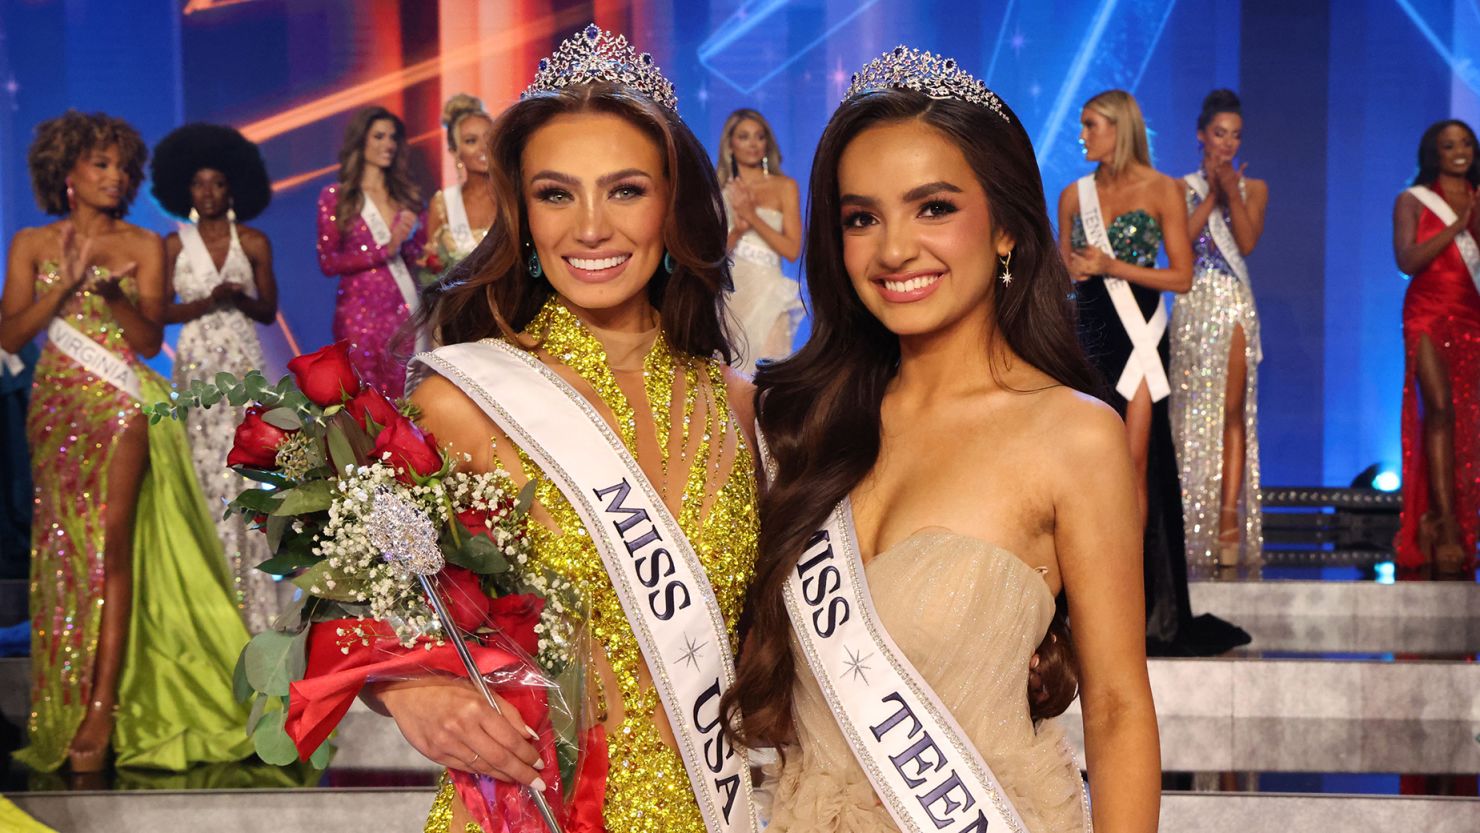 Miss USA 2023 Noelia Voigt and Miss Teen USA 2023 UmaSofia Srivastava resigned from their roles, fueling speculation about both pageants’ management and treatment of their talent.